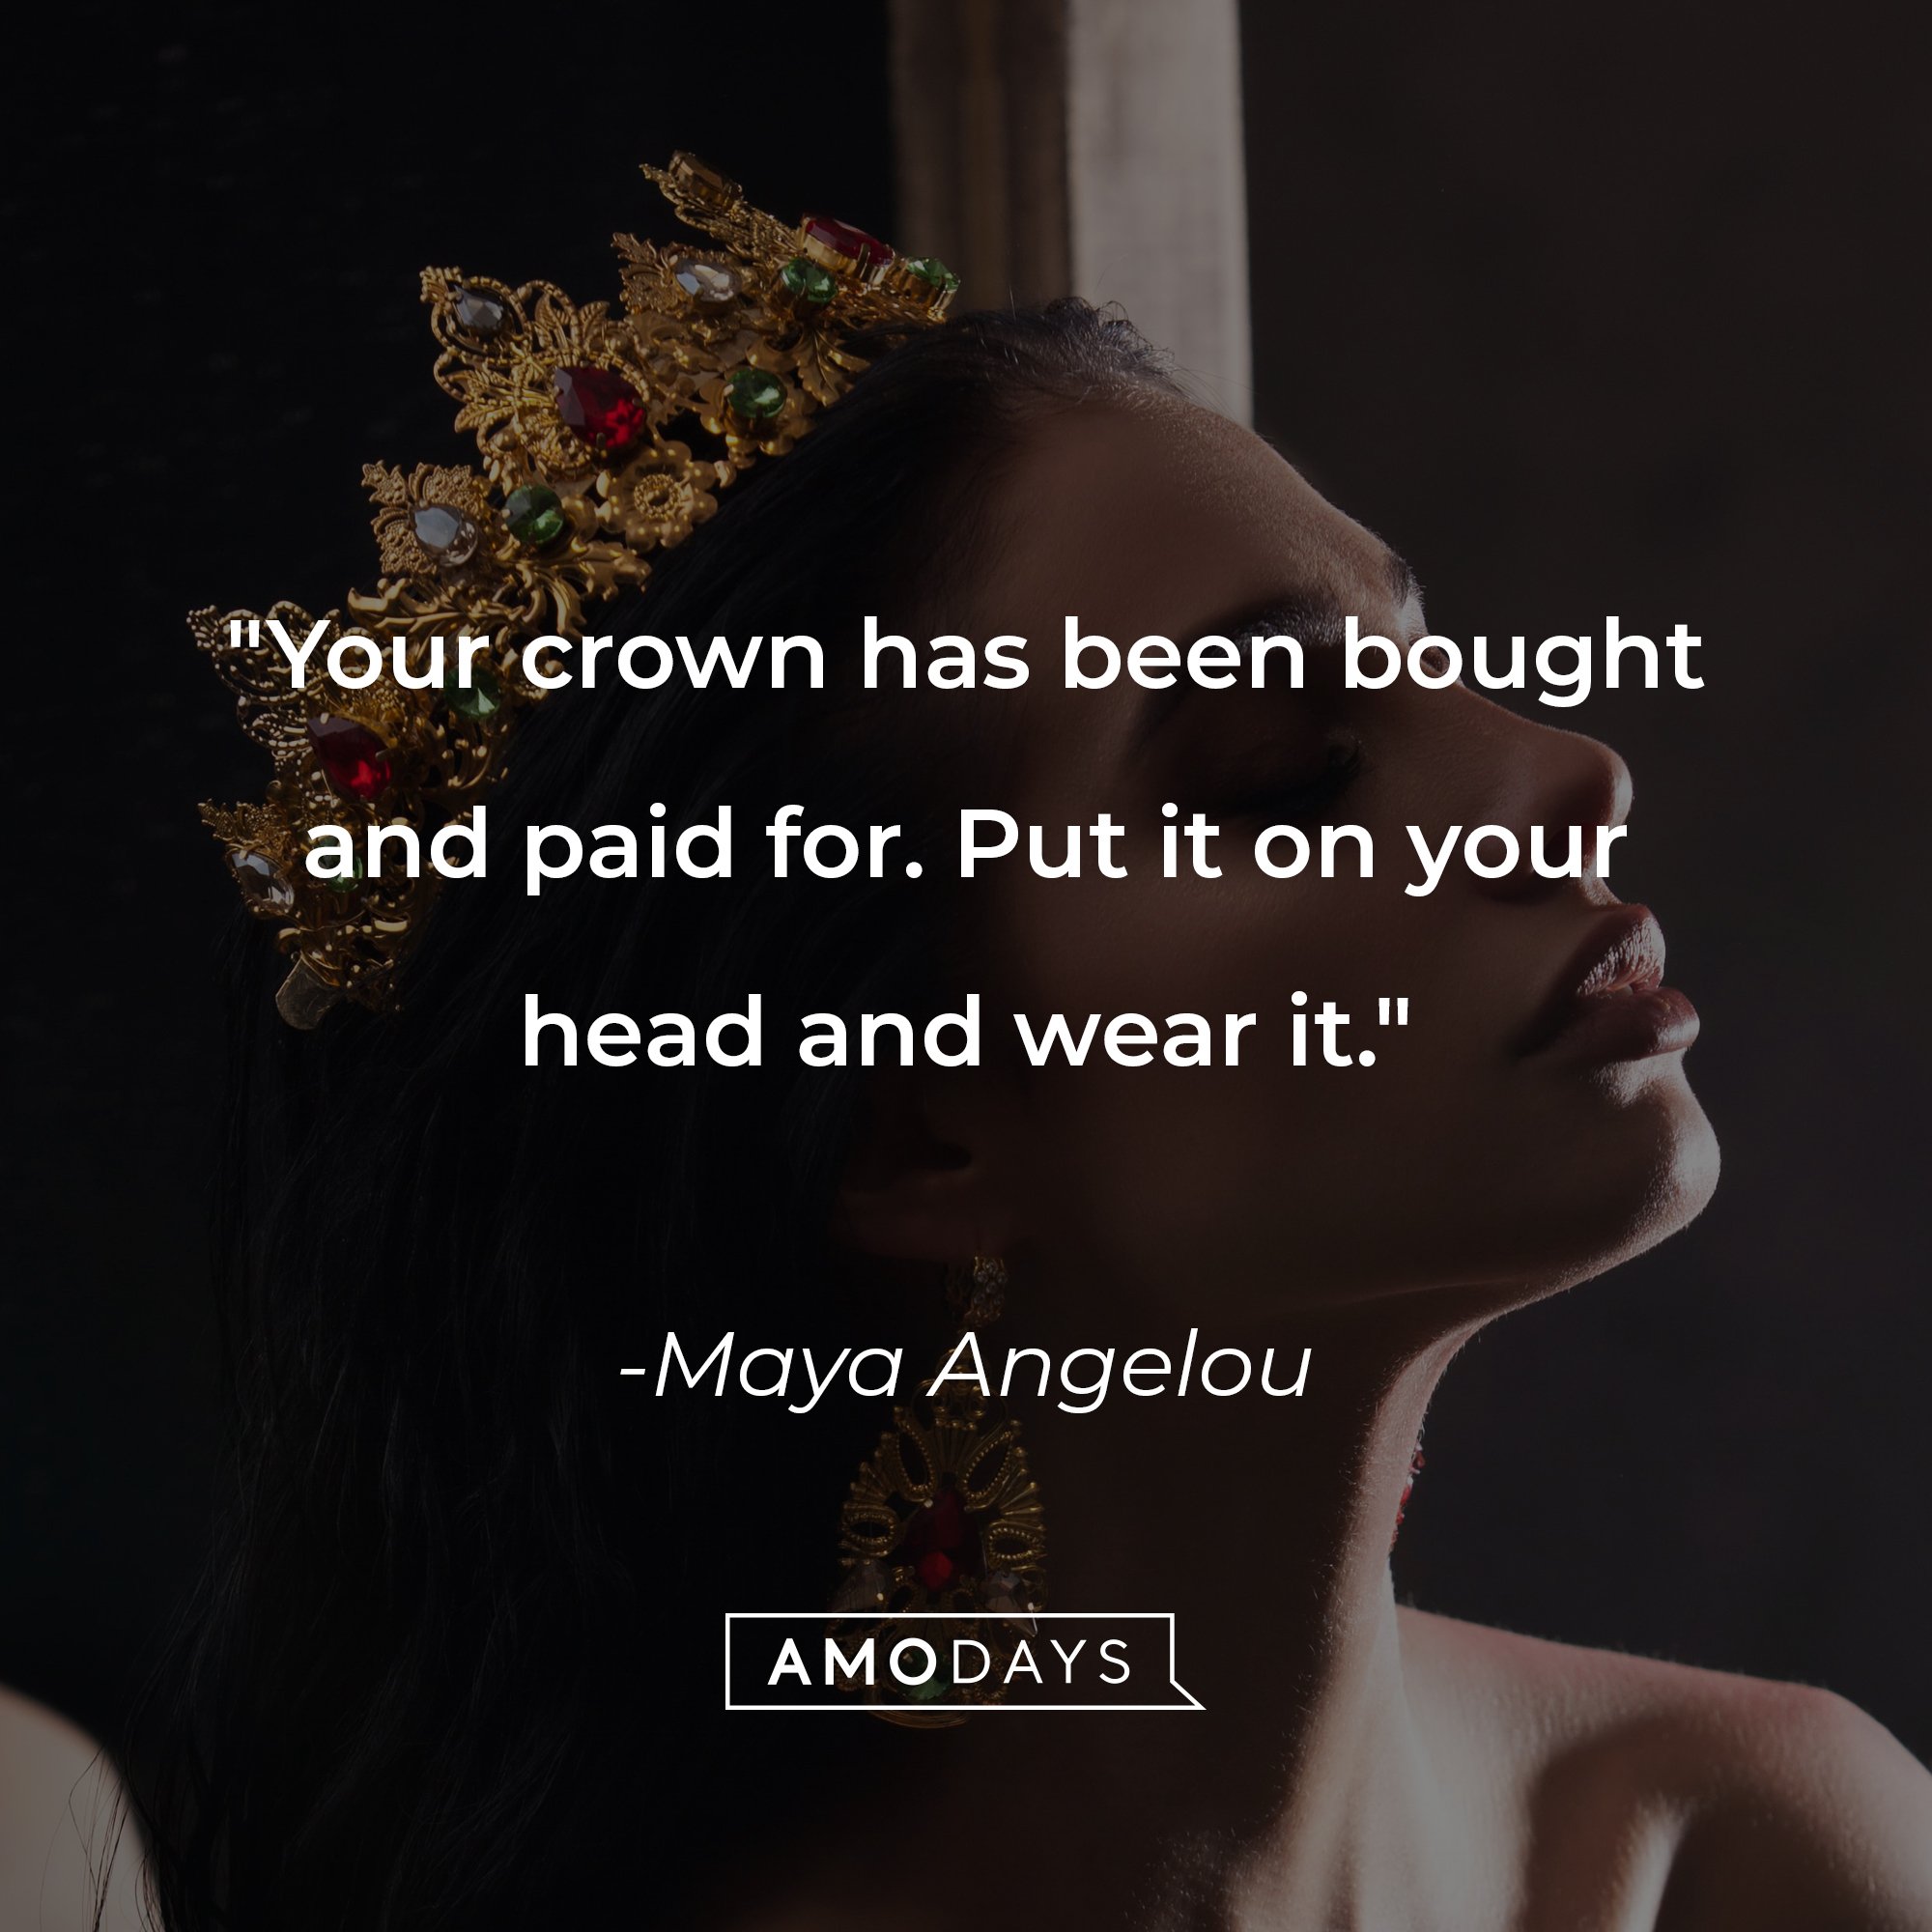 Maya Angelou's quote: "Your crown has been bought and paid for. Put it on your head and wear it." | Image: AmoDays